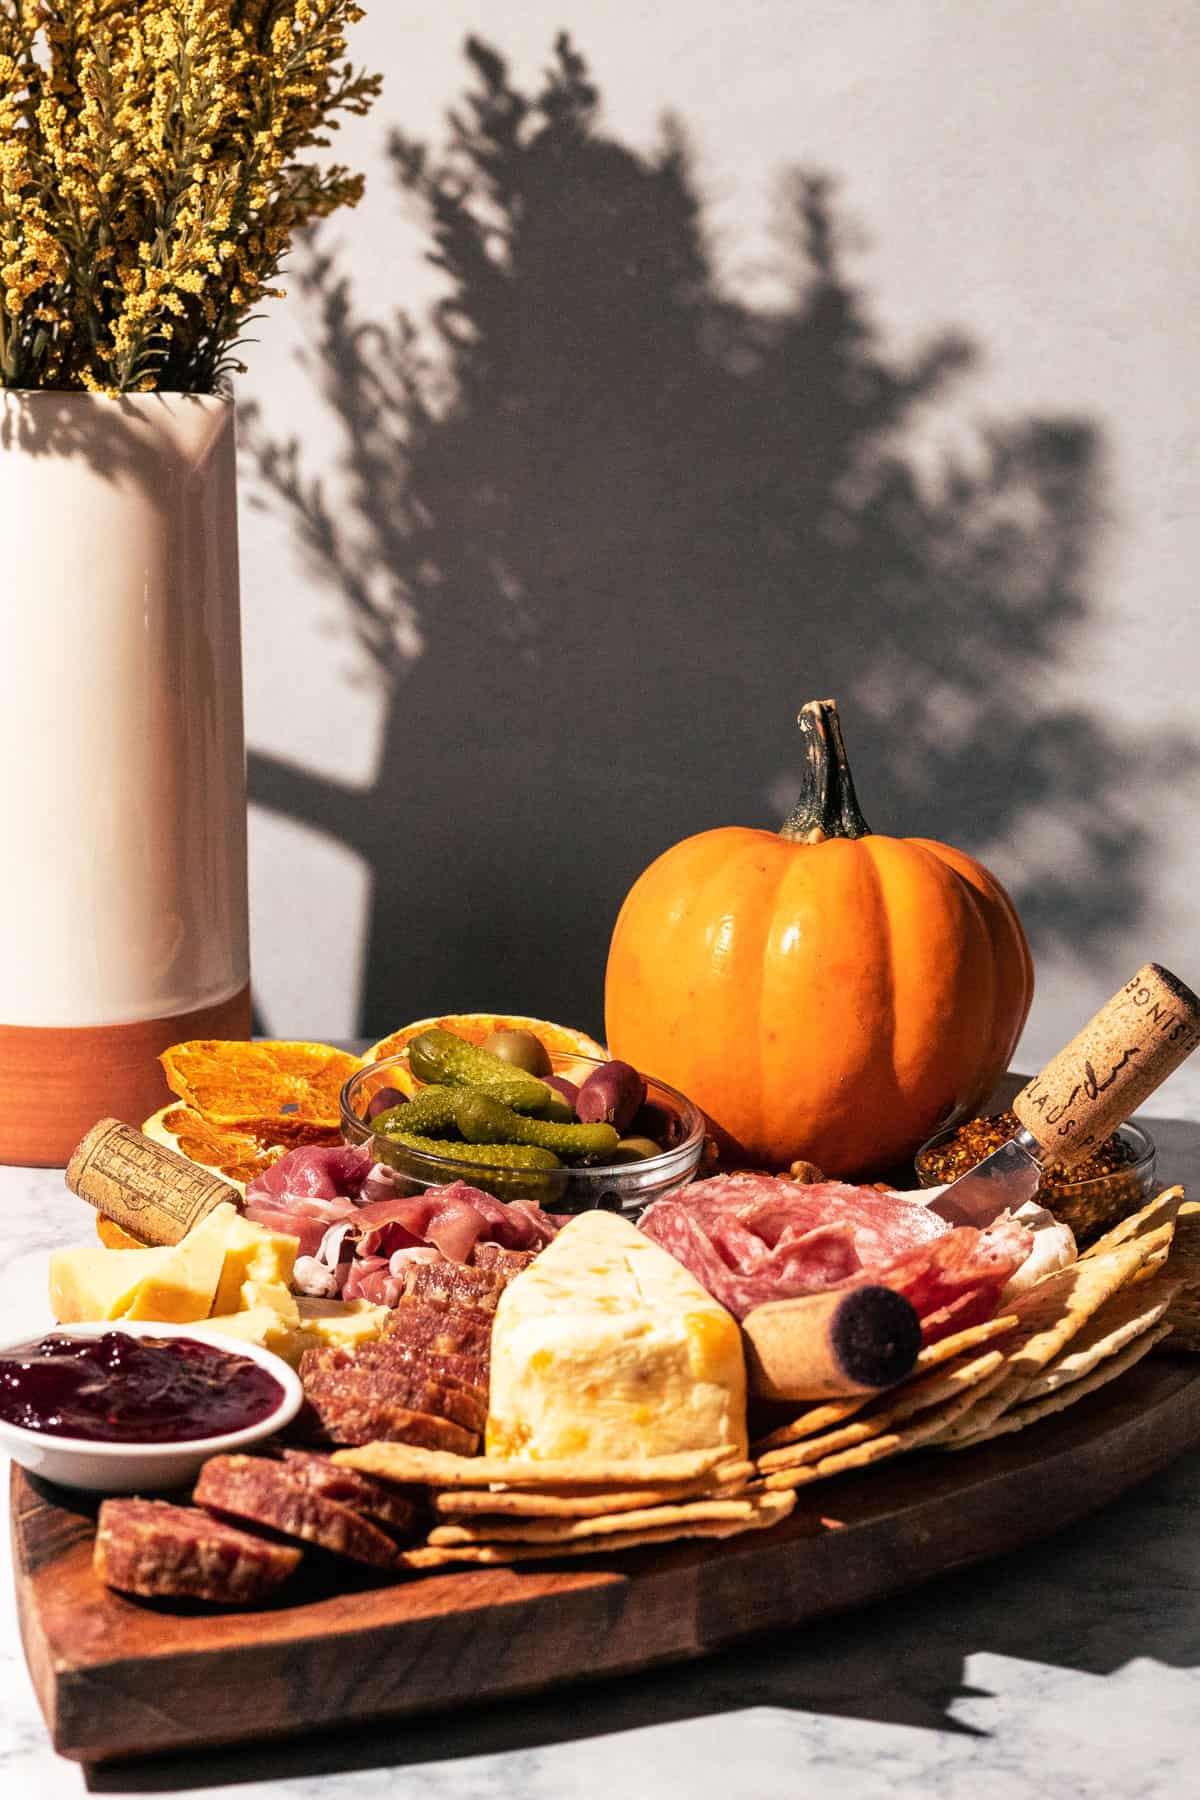 Thanksgiving charcuterie board with a vase of yellow flowers in the background.